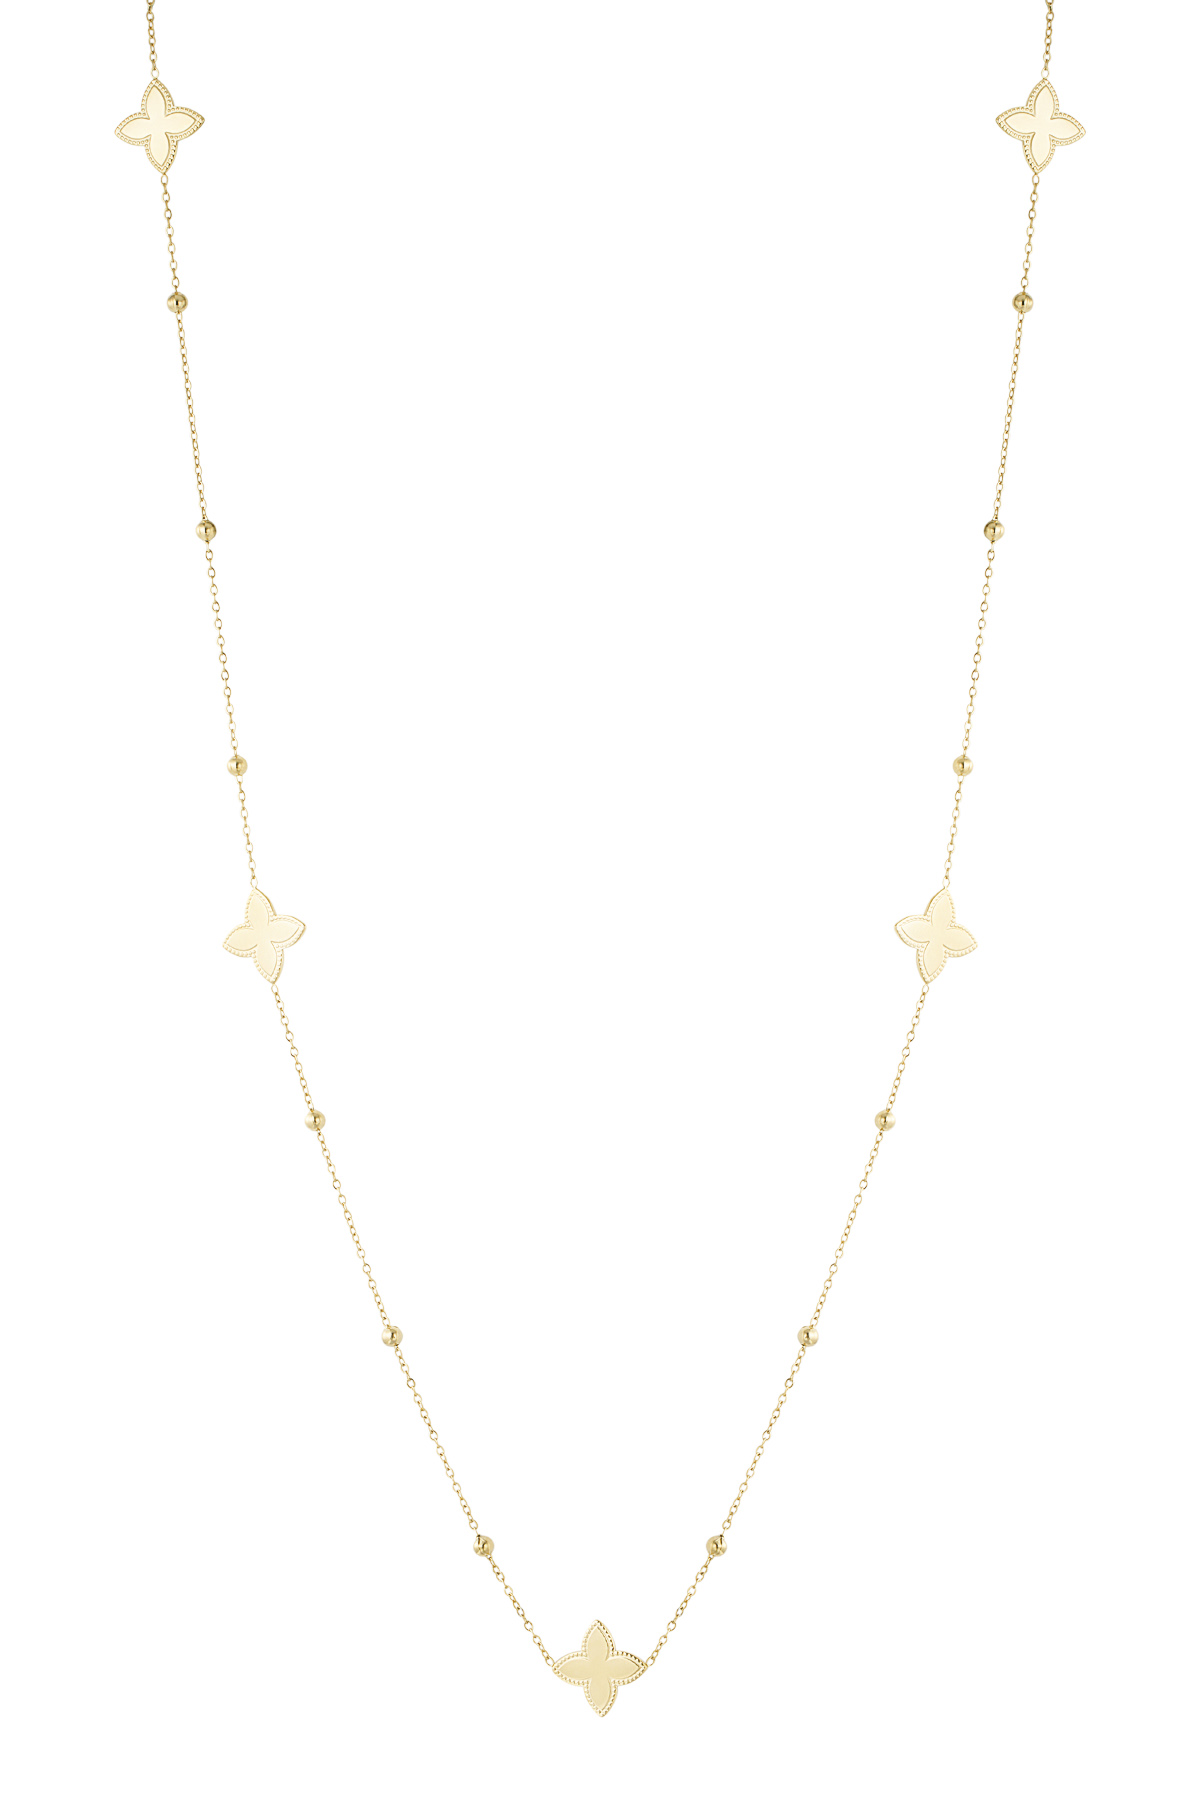 Long necklace with five flowers - gold